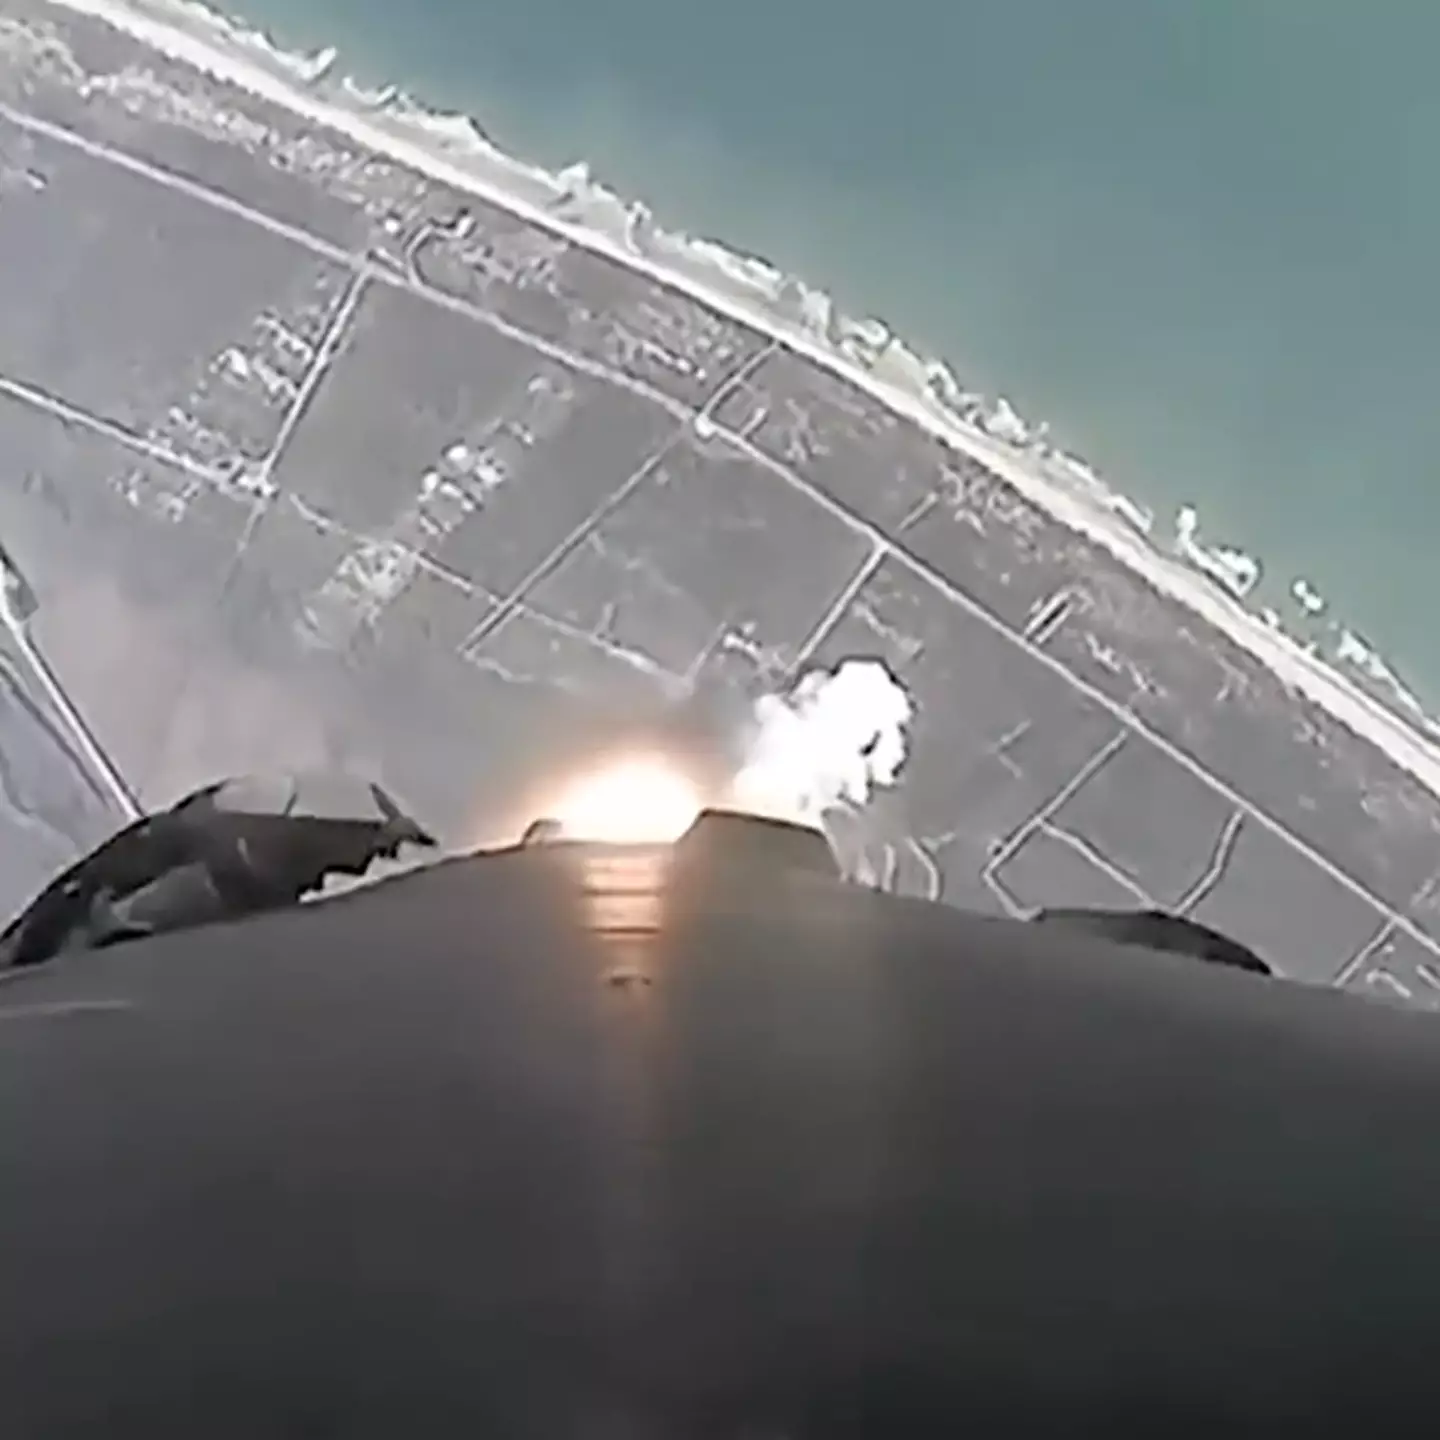 Insane footage shows what it looks like to fly from Earth to space